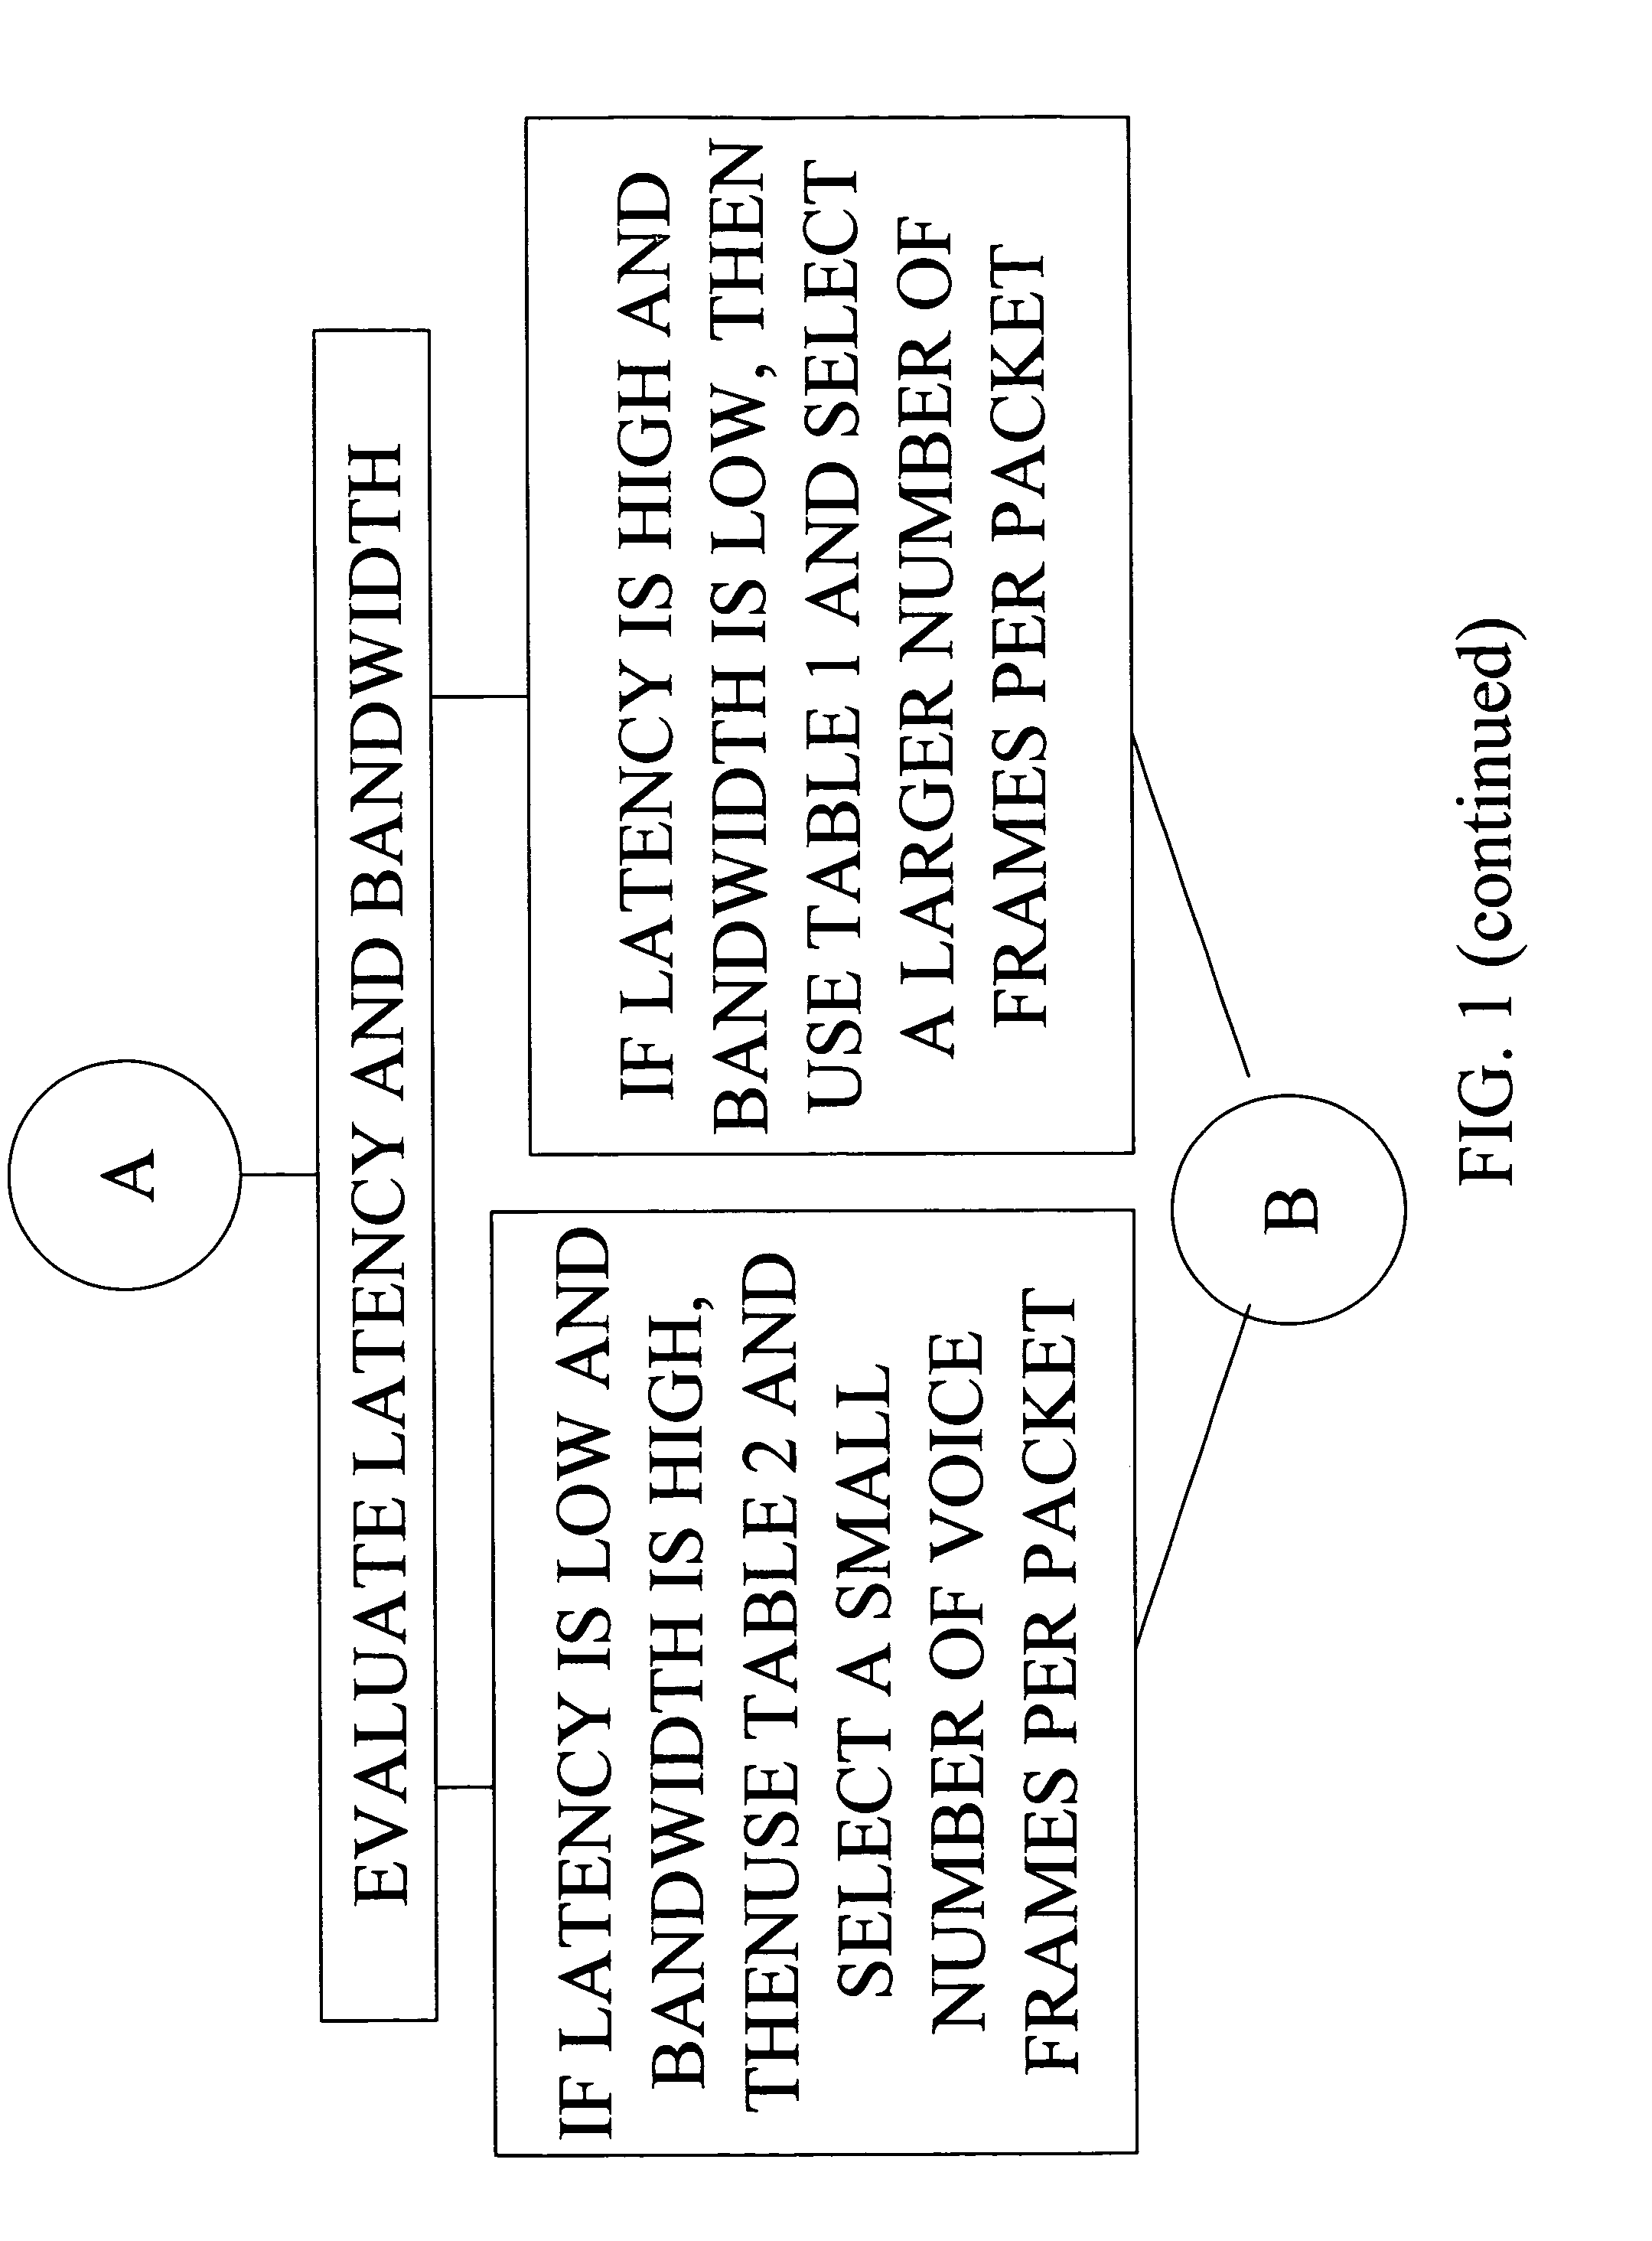 Voice optimization in a network having voice over the internet protocol communication devices